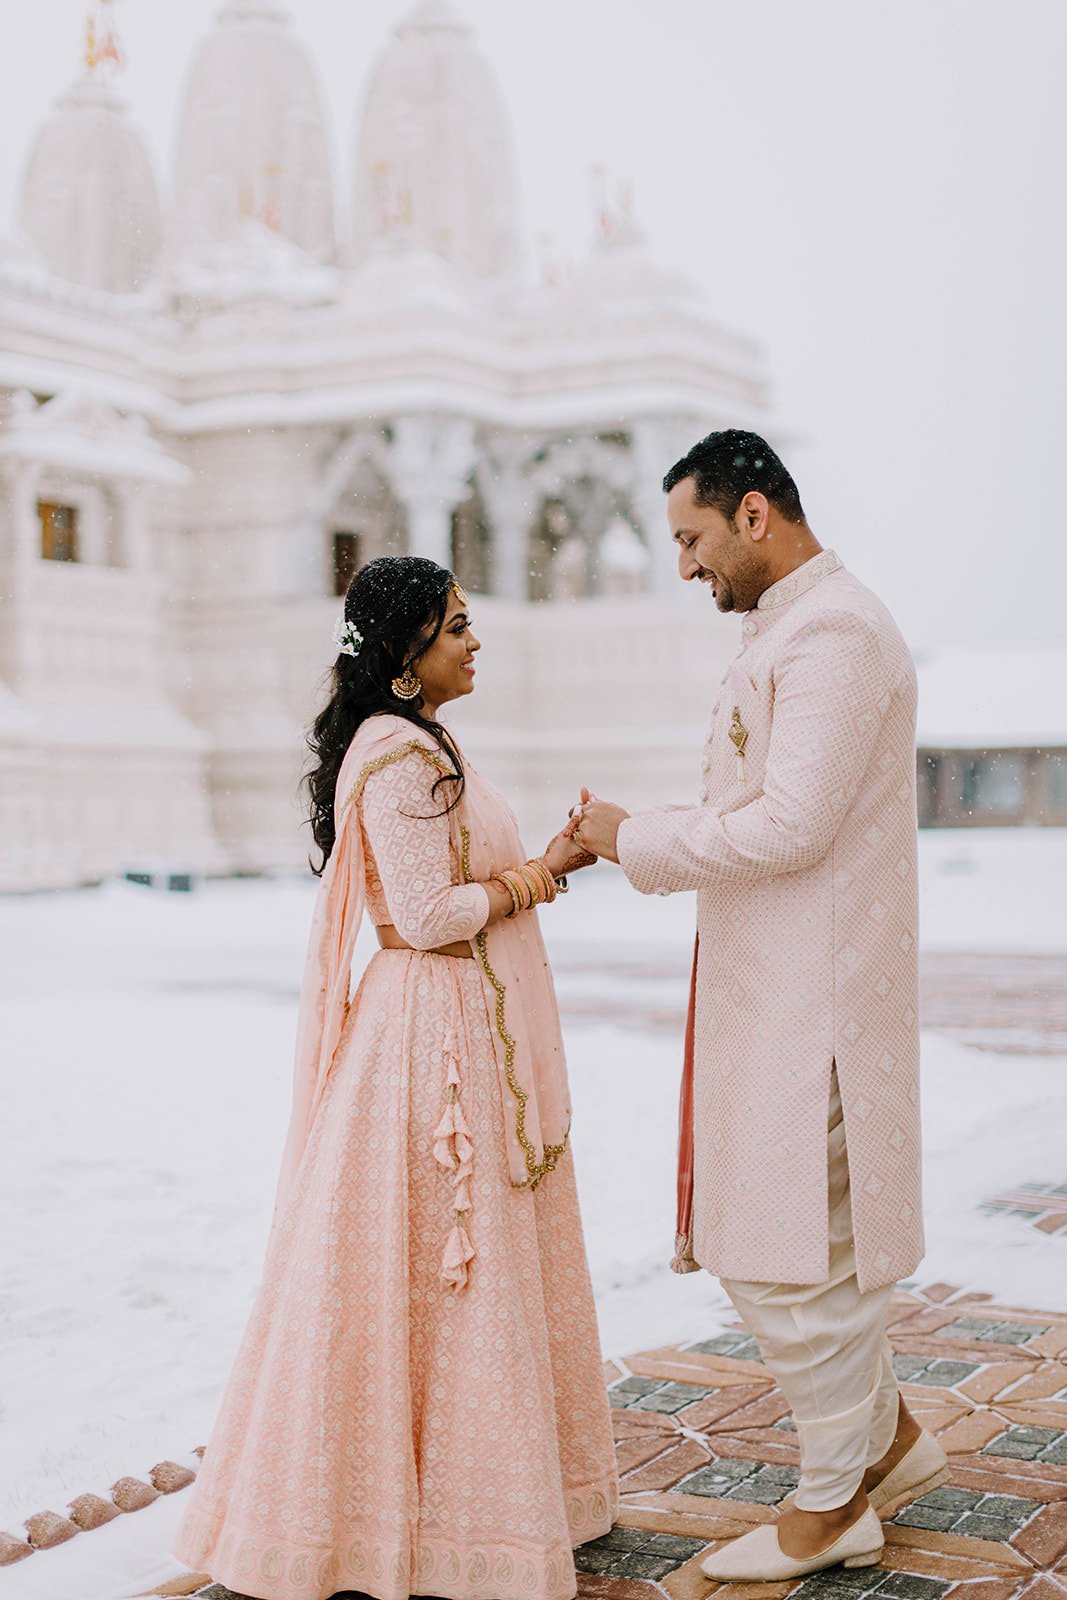 Newlyweds hold hands in front of snow covered Hindu temple